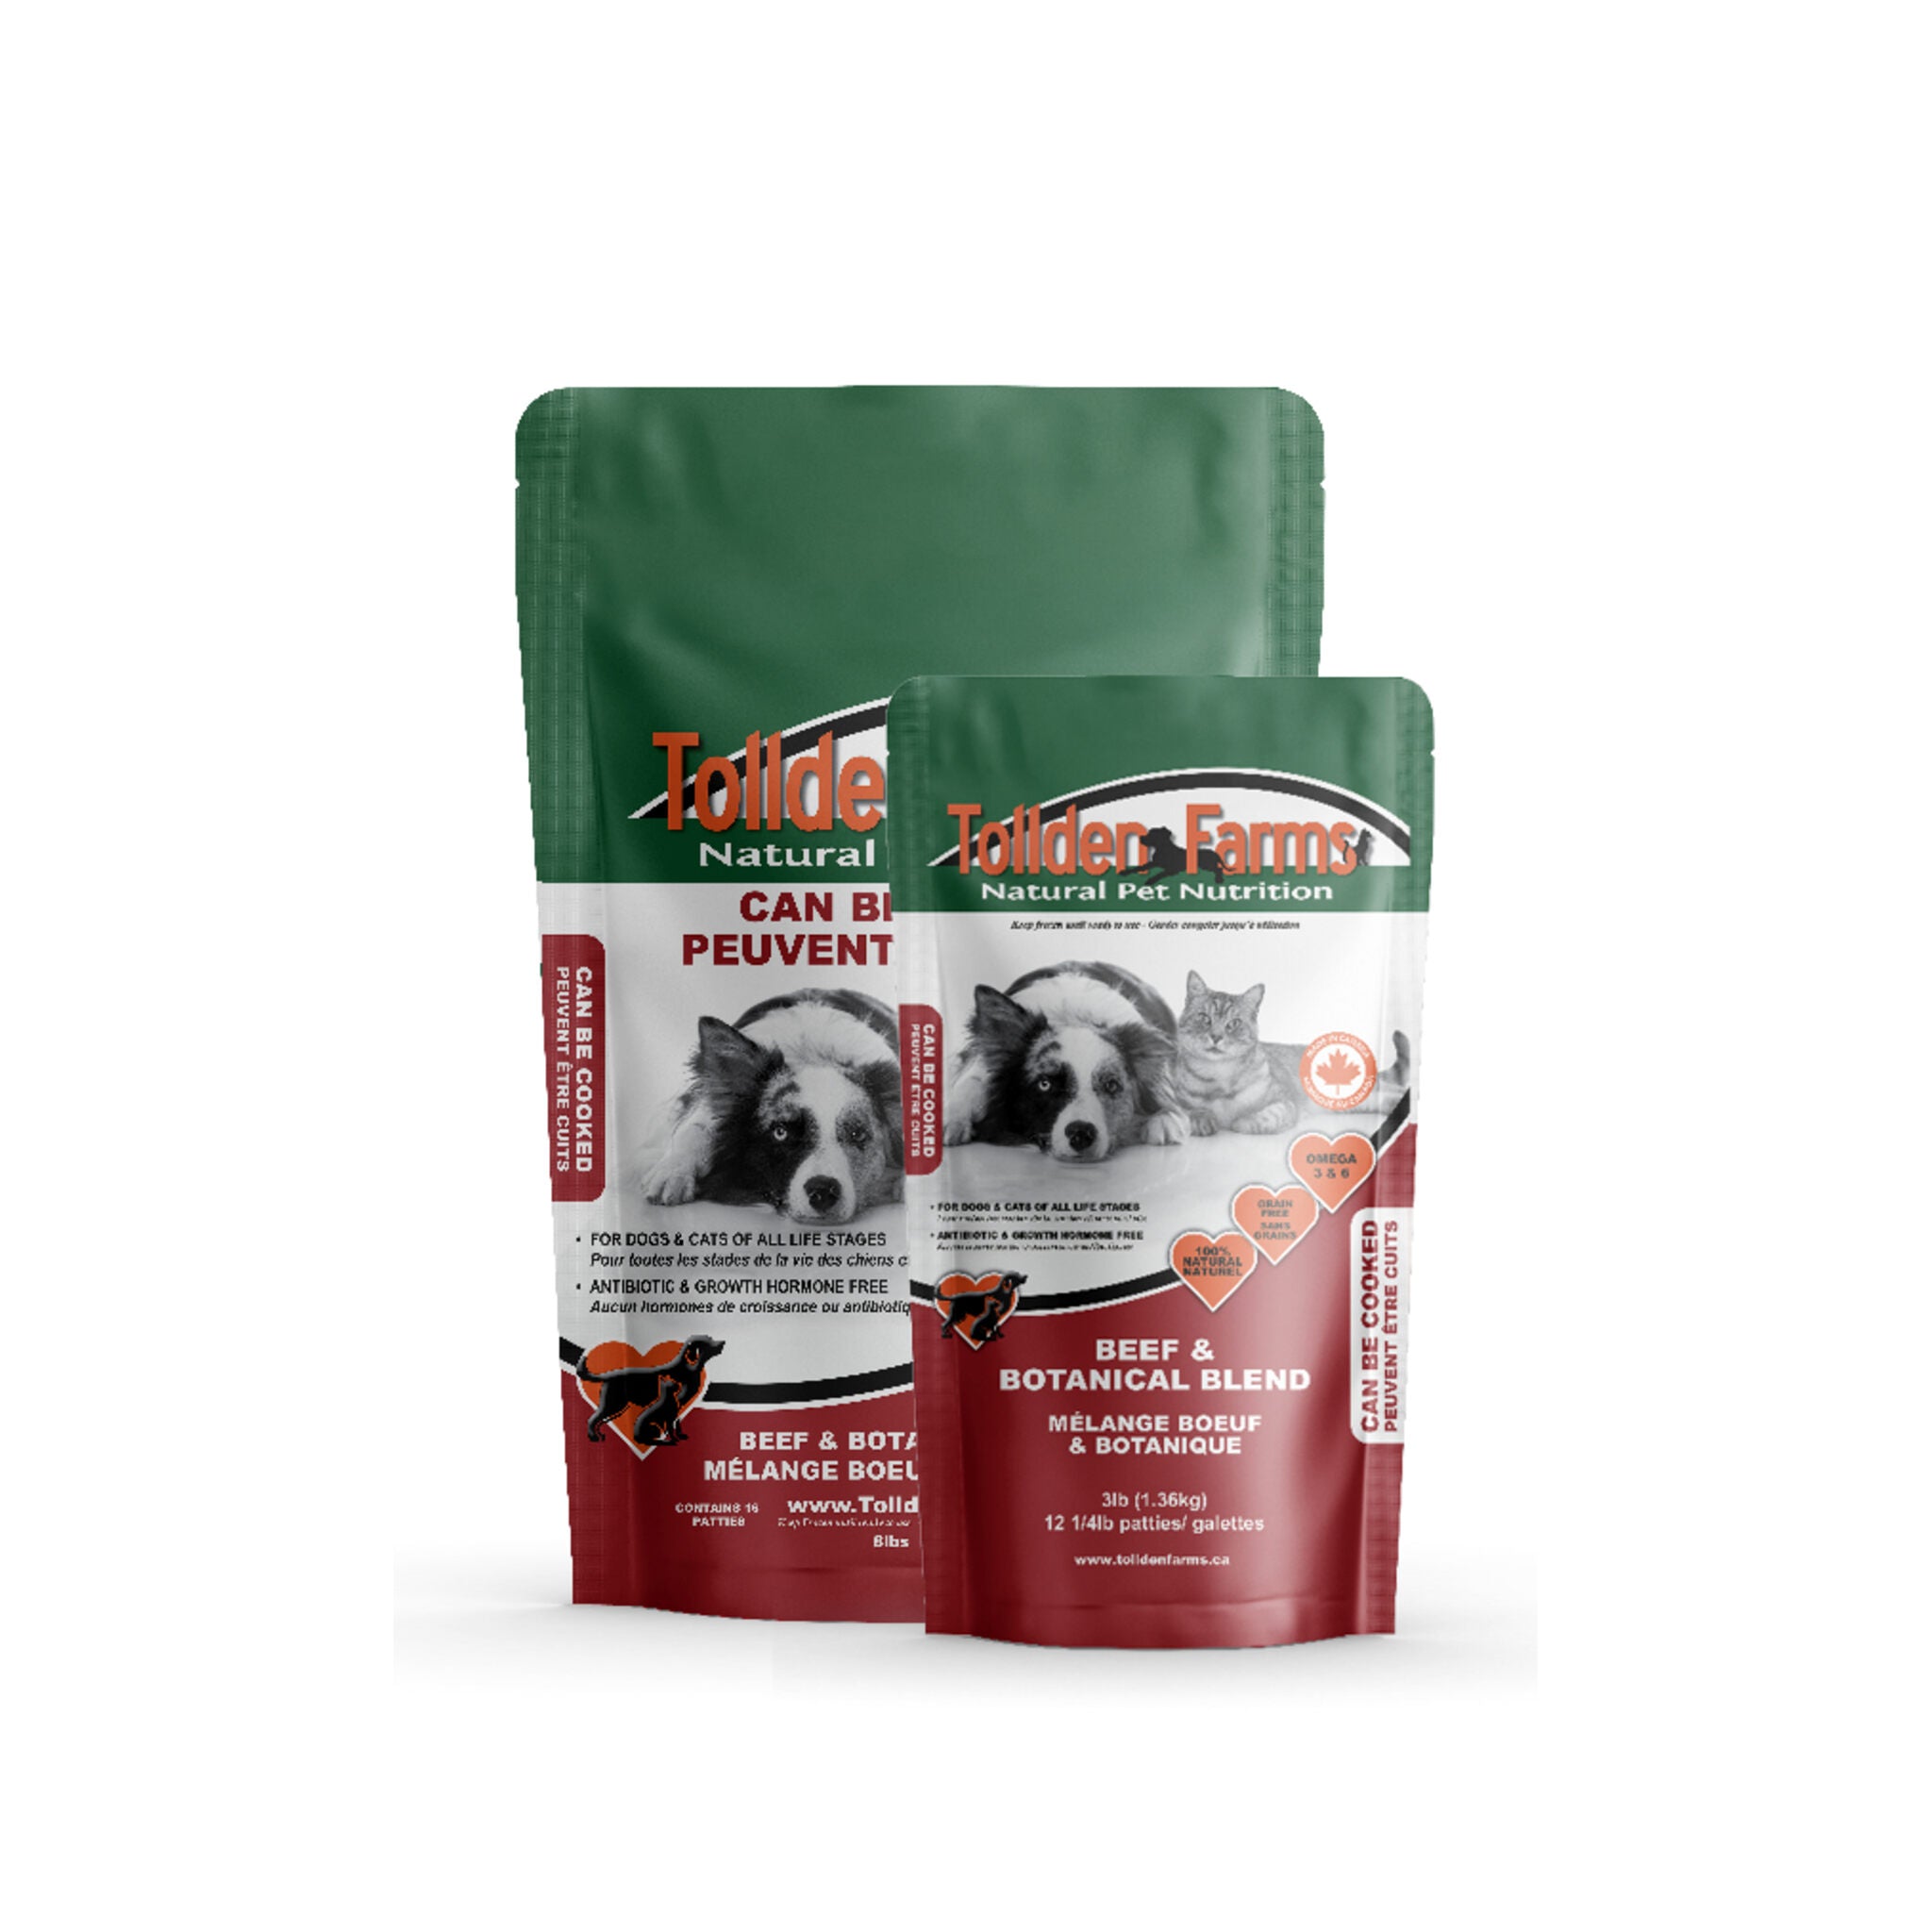 Tollden Farms raw dog food, Beef & Botanical Blend, dogs and cats, 8 lb and 3 lb options.